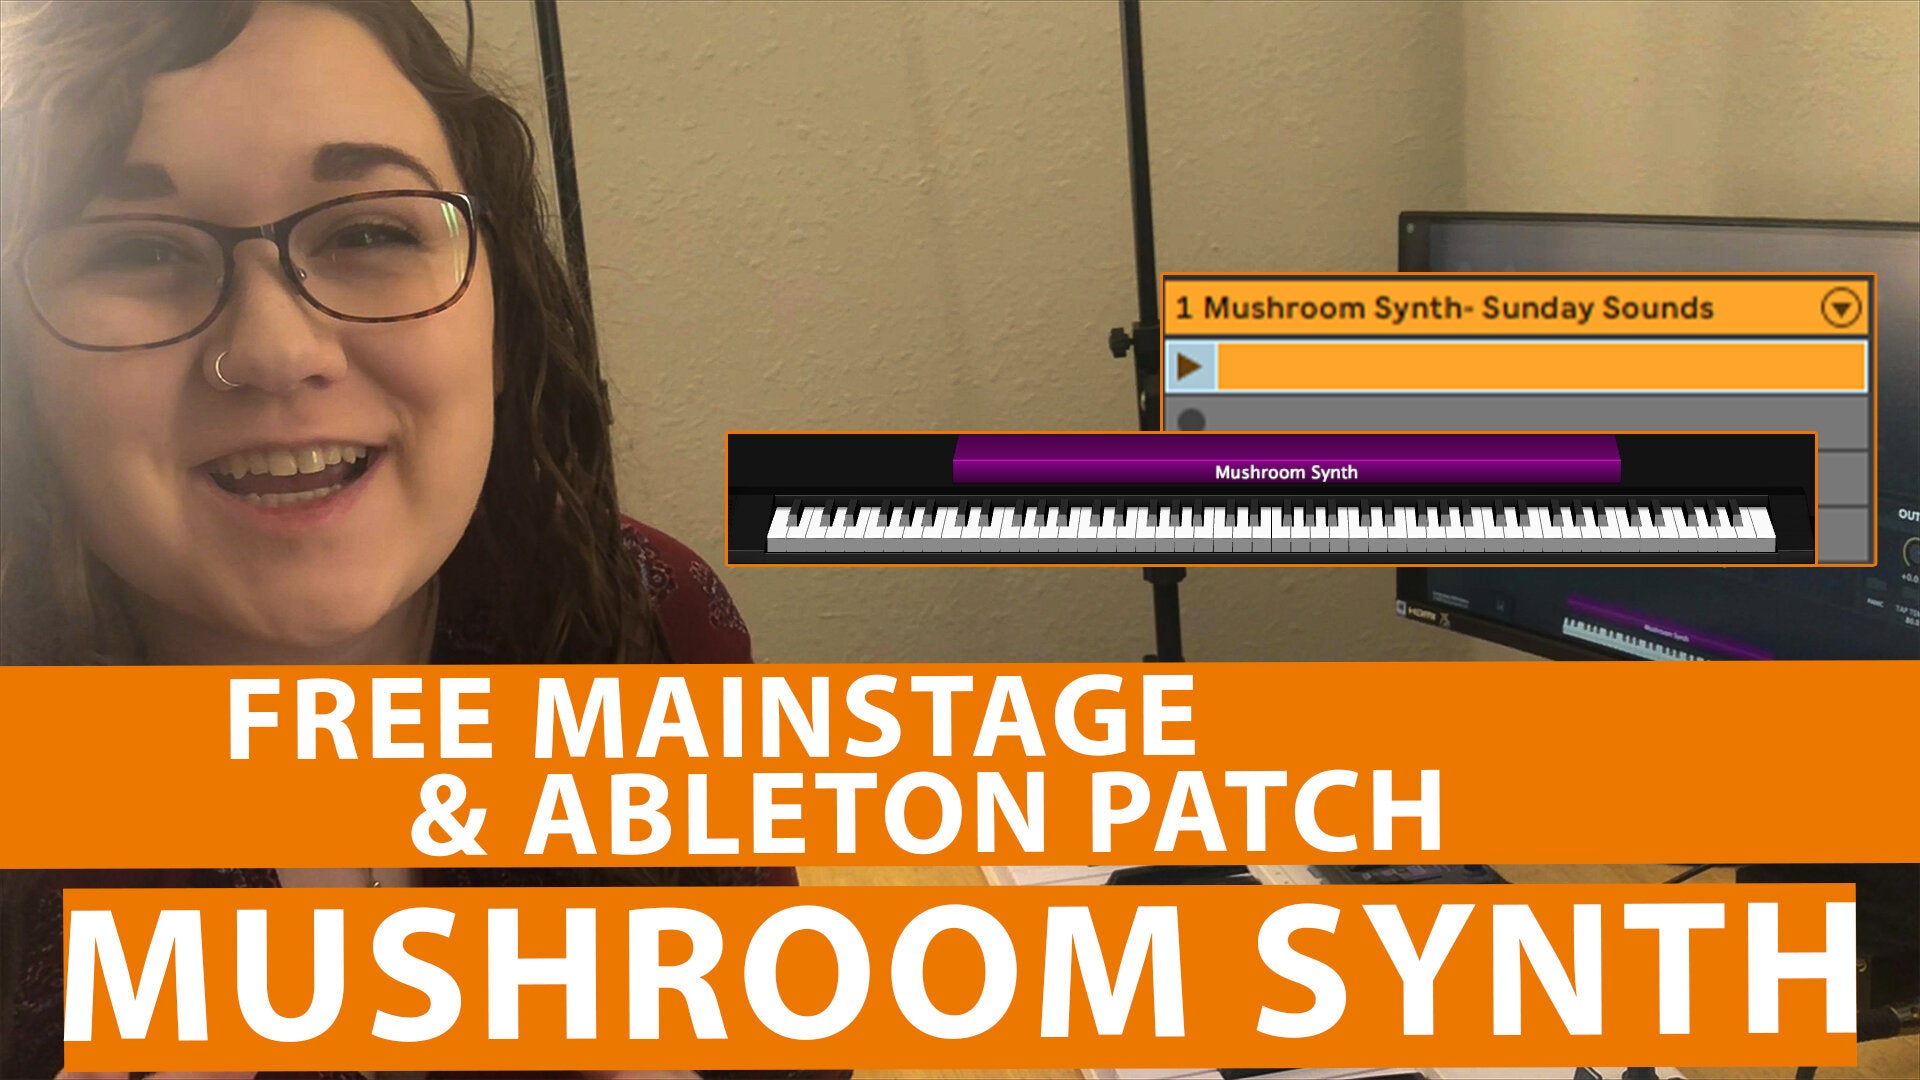 Free MainStage & Ableton Worship Patch! - Mushroom Synth